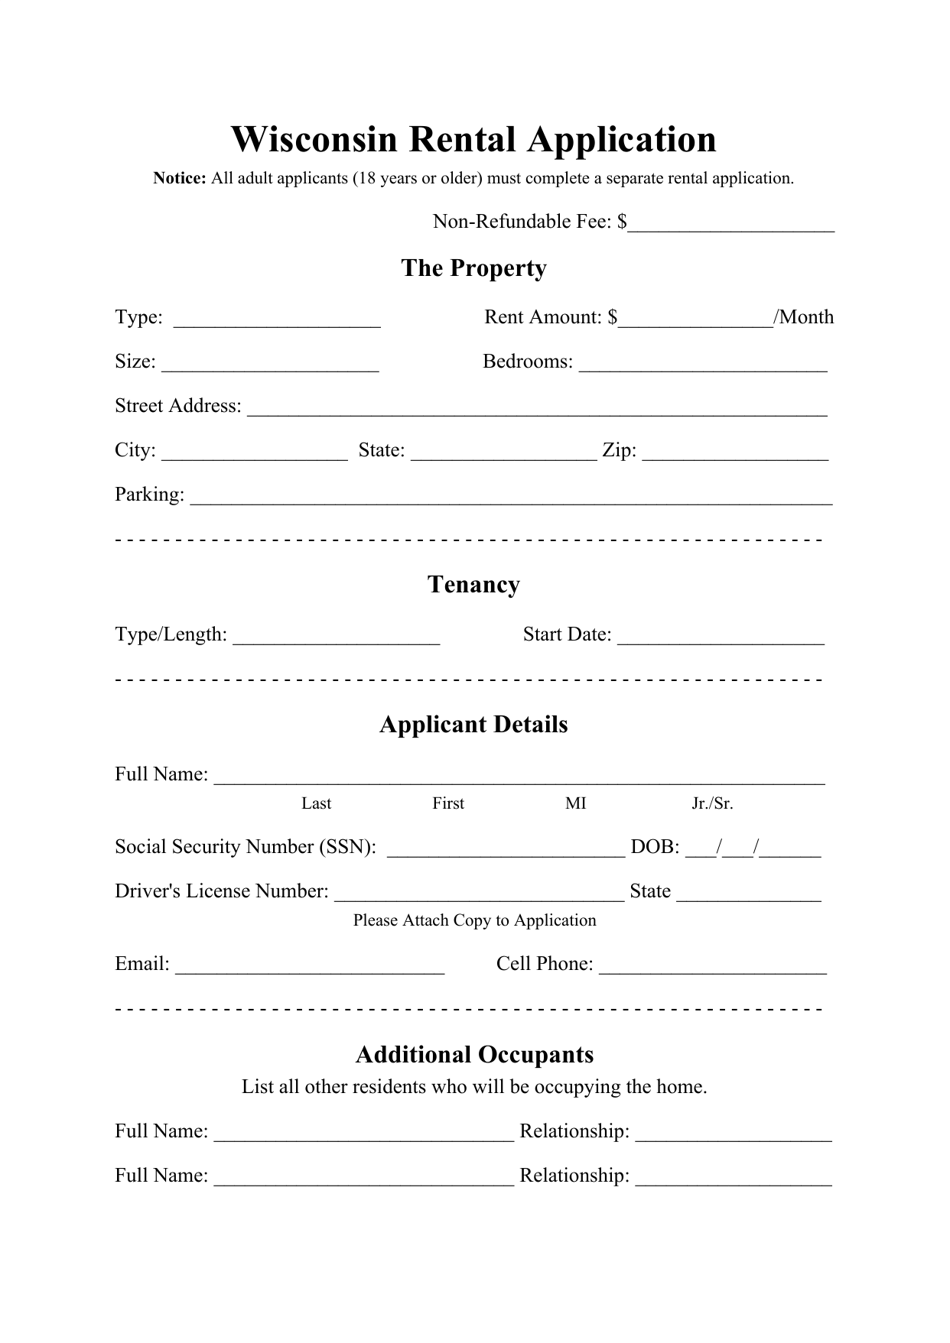 Rental Application Form - Wisconsin, Page 1